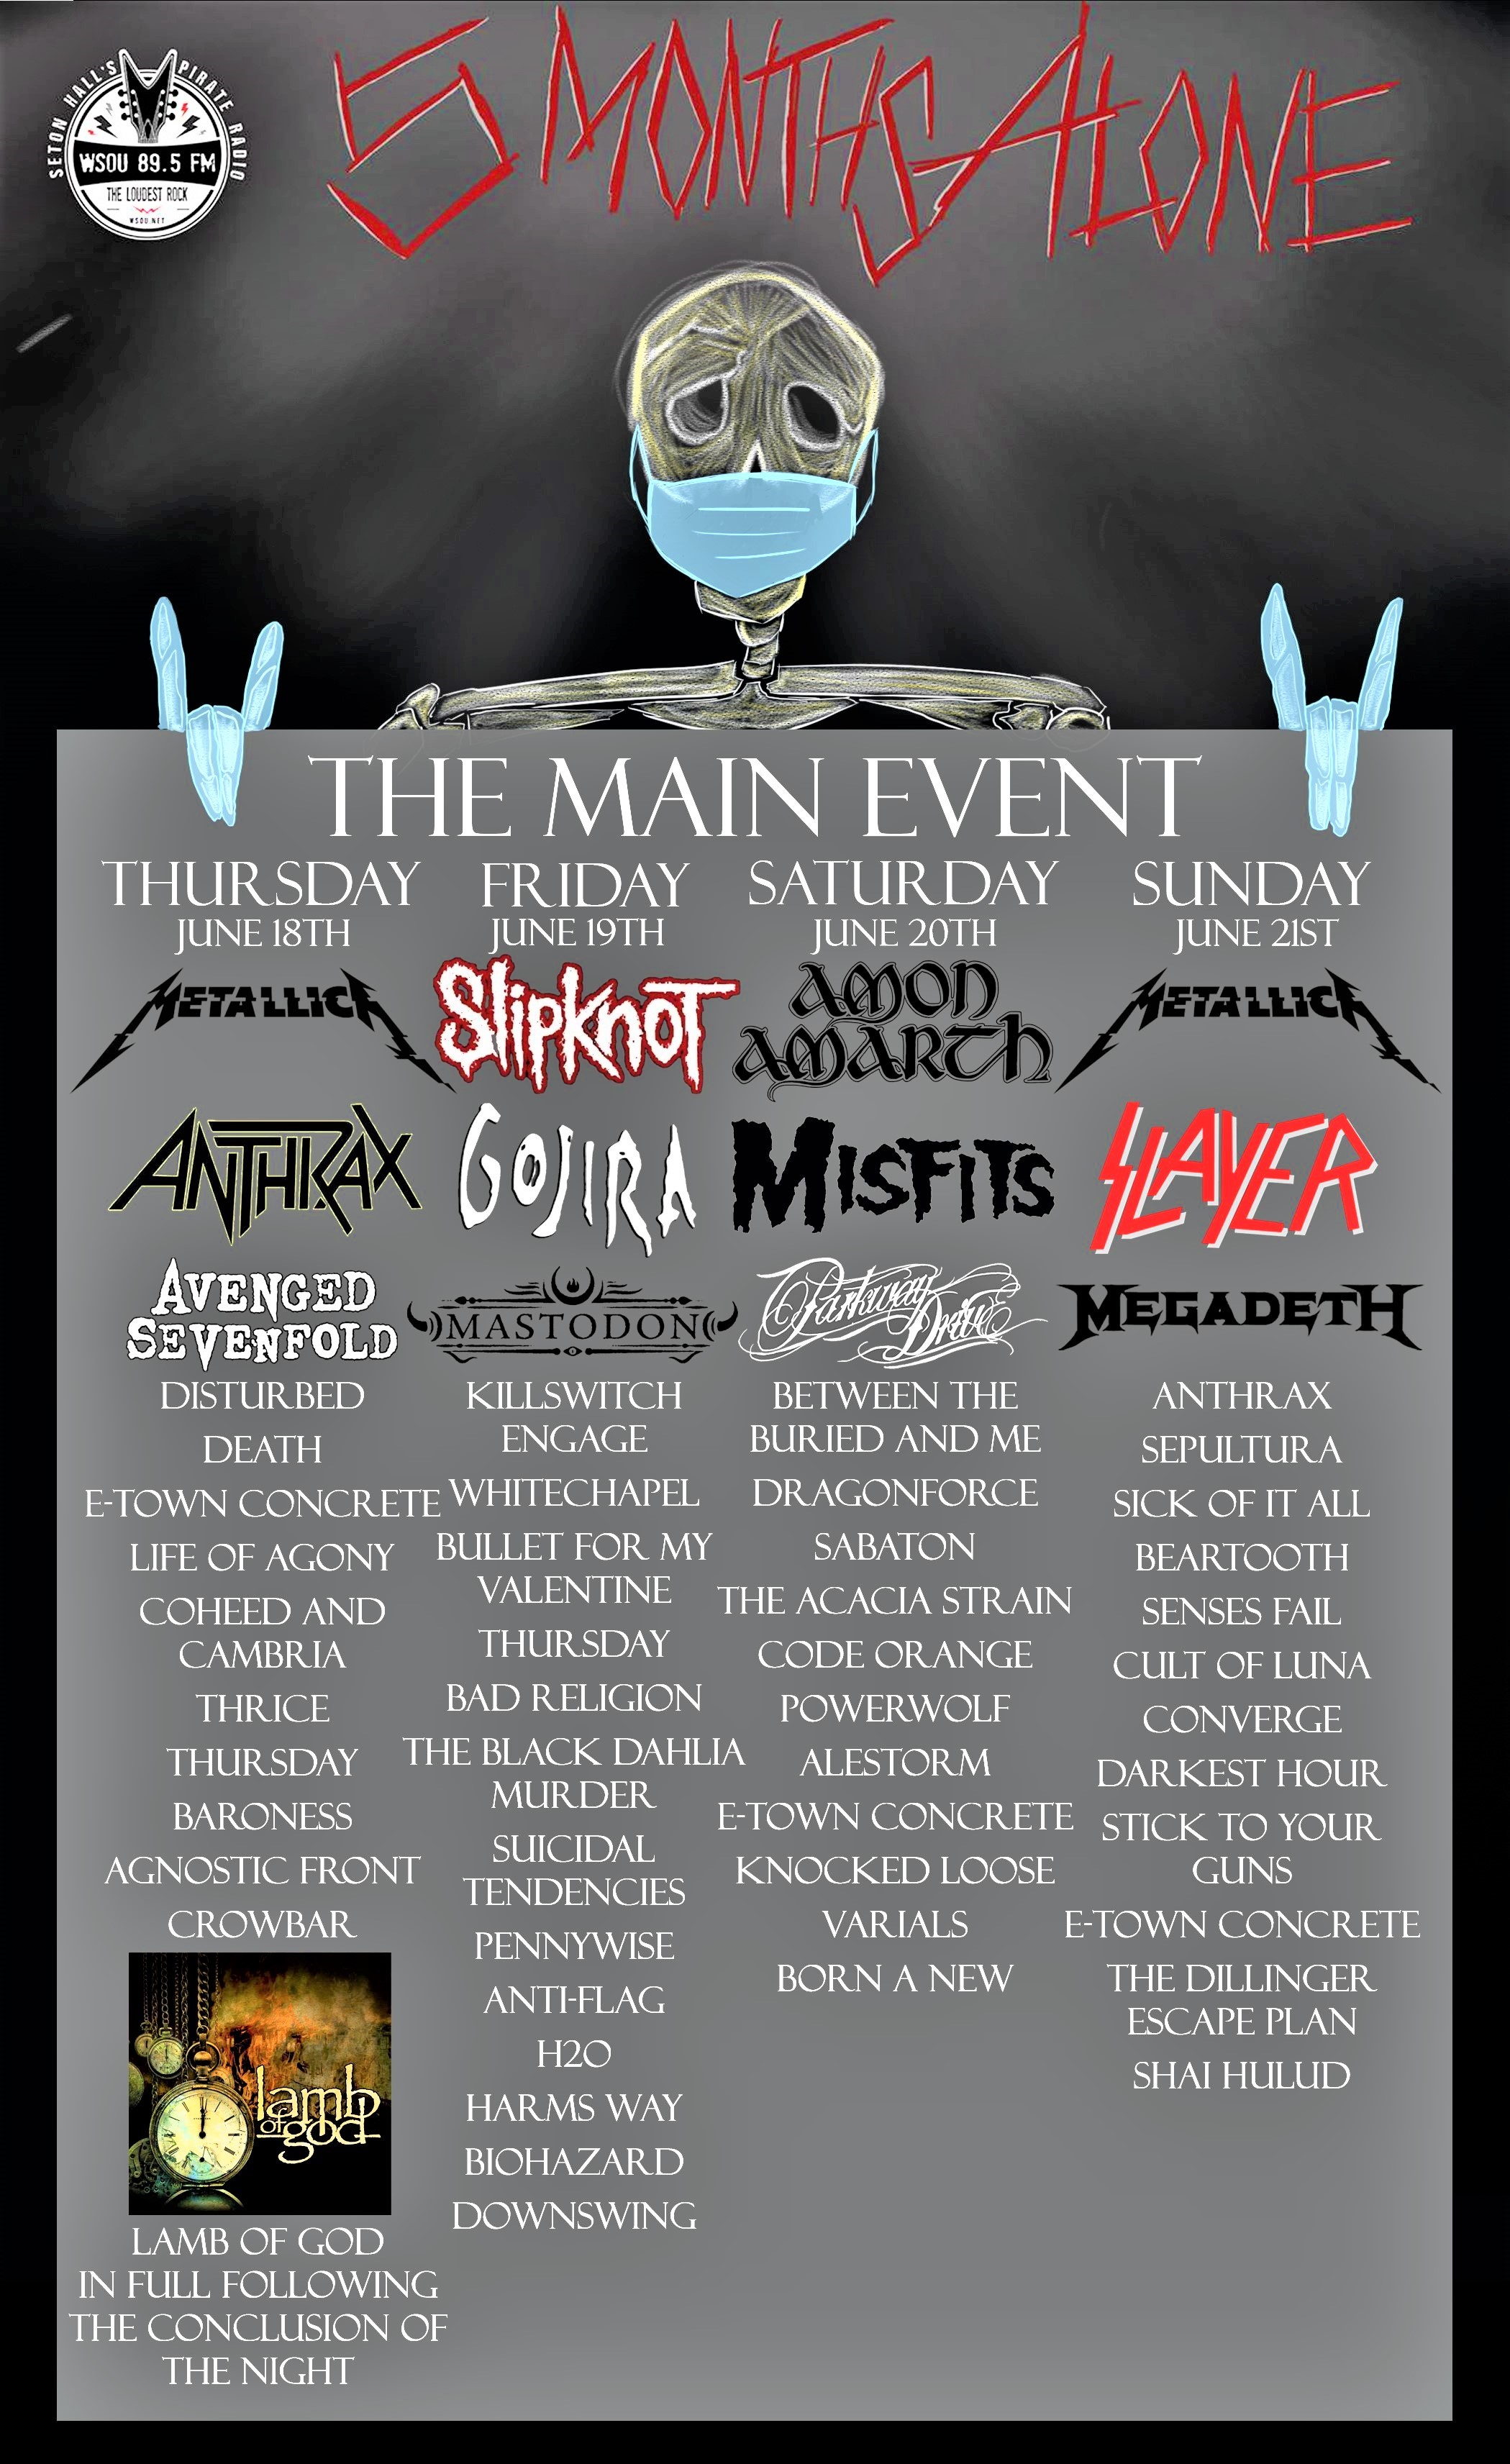 THE MAIN EVENT THURSDAY JUNE18TH Metallica, Anthrax, Avenged Sevenfold and more! FRIDAY JUNE 19TH Slipknot, Gojira, Mastodon and more! SATURDAY JUNE 20TH Amon Amarth, Misfits, Parkway Drive and more! SUNDAY JUNE 21ST Metallica, Slayer, Megedath and more!